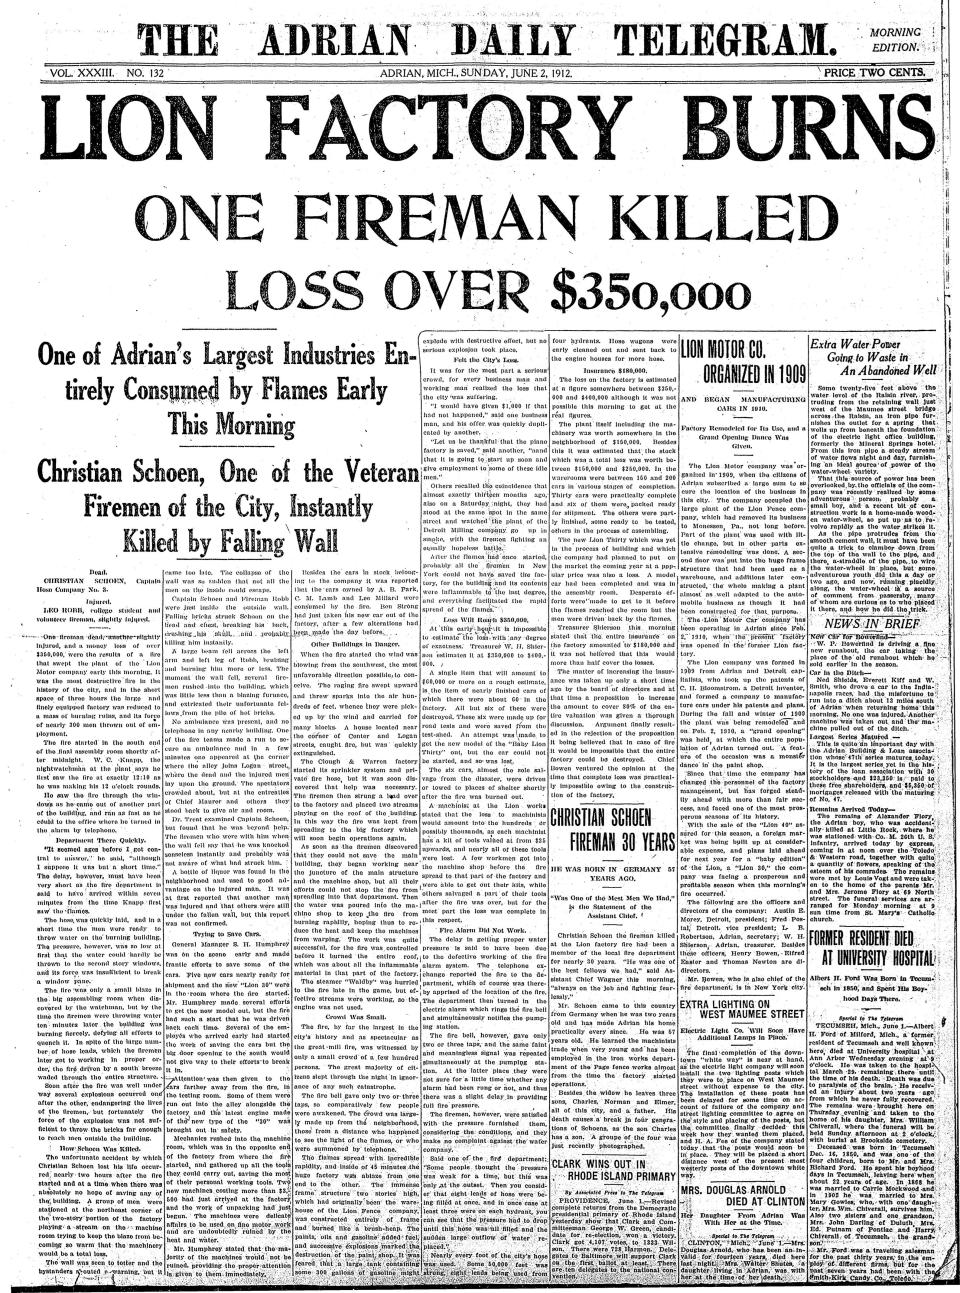 The Sunday, June 2, 1912, edition of The Adrian Daily Telegram was headlined by the blaze that destroyed the Lion Motor Car Co. in Adrian. Not only did the fire result in the loss of the automobile manufacturer's inventory, but also the death of Christian Schoen, captain of the Adrian Fire Department's Hose Company 3.